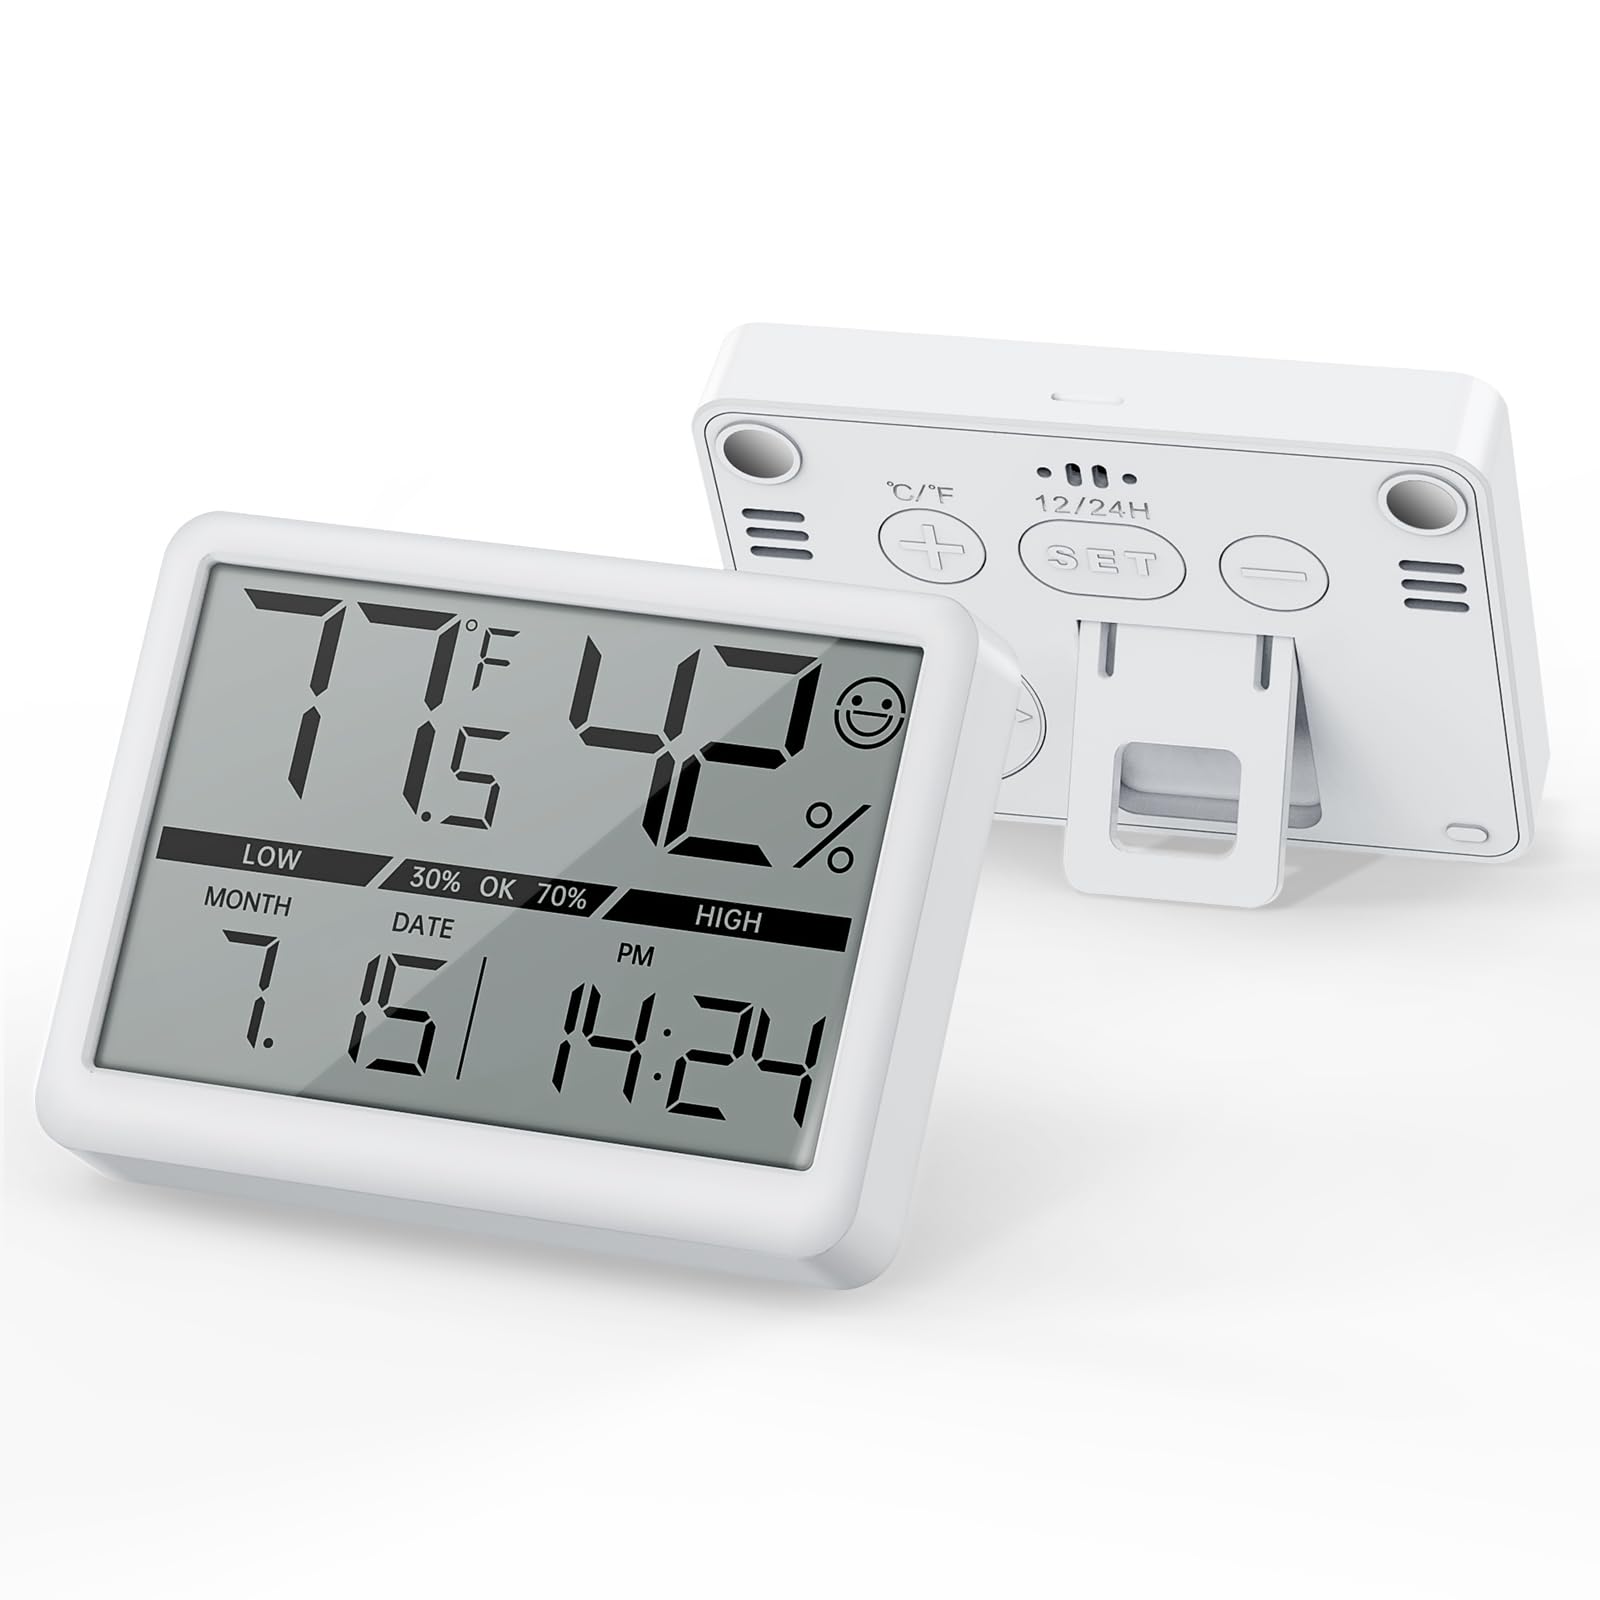 New Upgrade Deeyaple Small Digital Clock Battery Powered Atomic Clock Humidity Meter Magnetic Thermometer High Accuracy Temp(℉/℃) Date 12/24H Display LCD Large Number Indoor Outdoor Travel White